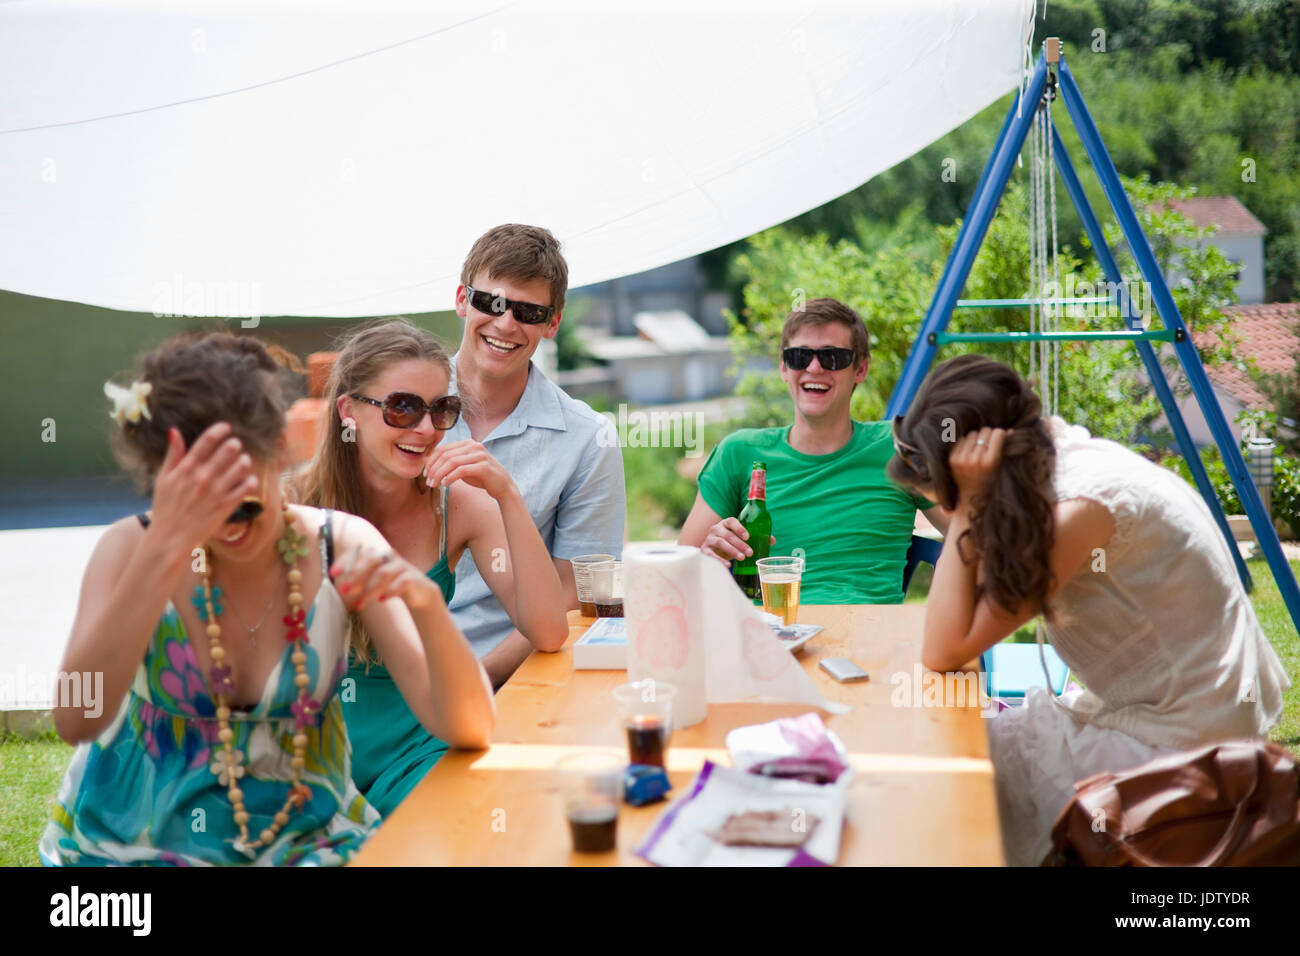 Friends laughing at table outdoors Stock Photo